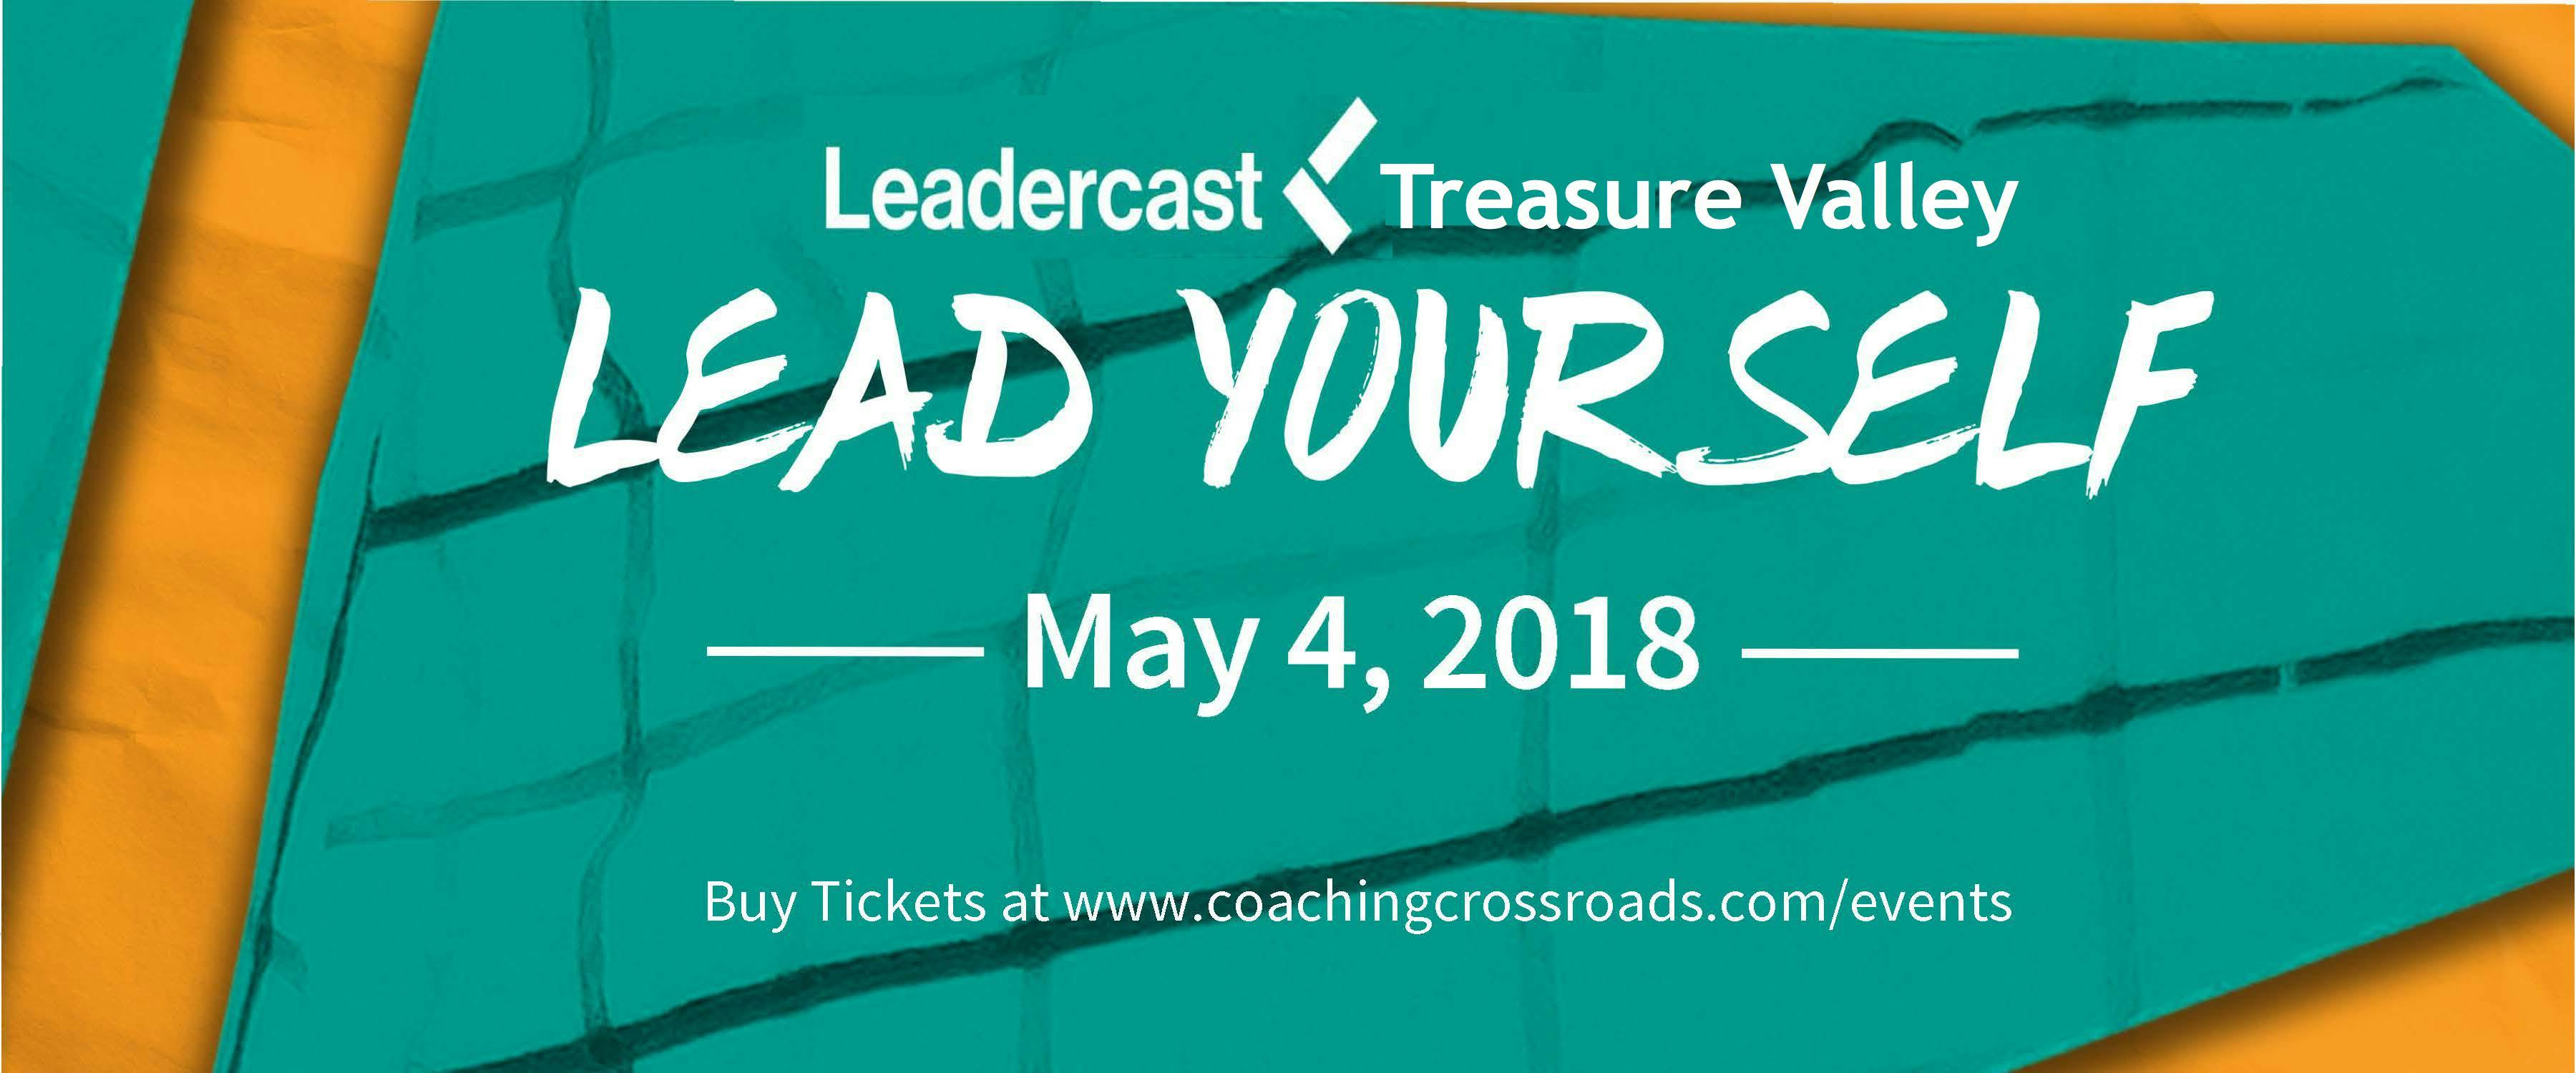 Leadercast Treasure Valley 2018 - Hosted by Jamie Chapman at Coaching Crossroads® Executive Coaching, EQ Assessments & Training, Conferences